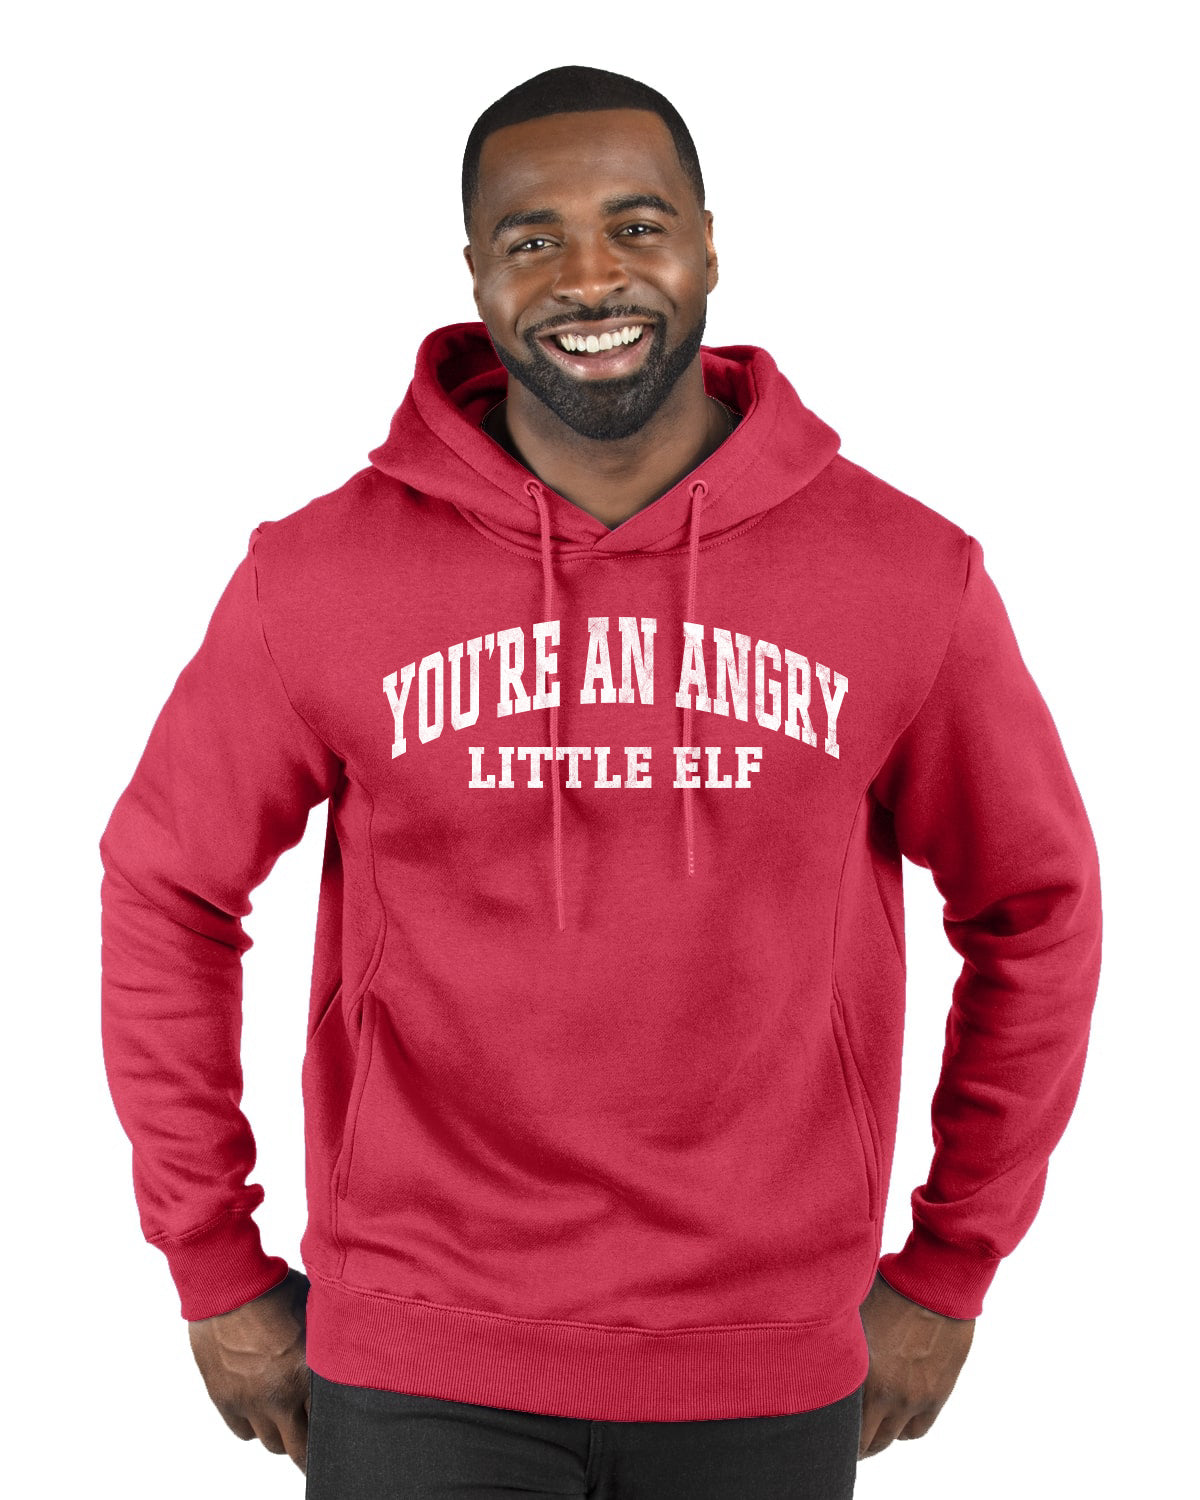 Vintage Movie Quote You're An Angry Little Elf Christmas Premium Graphic Hoodie Sweatshirt